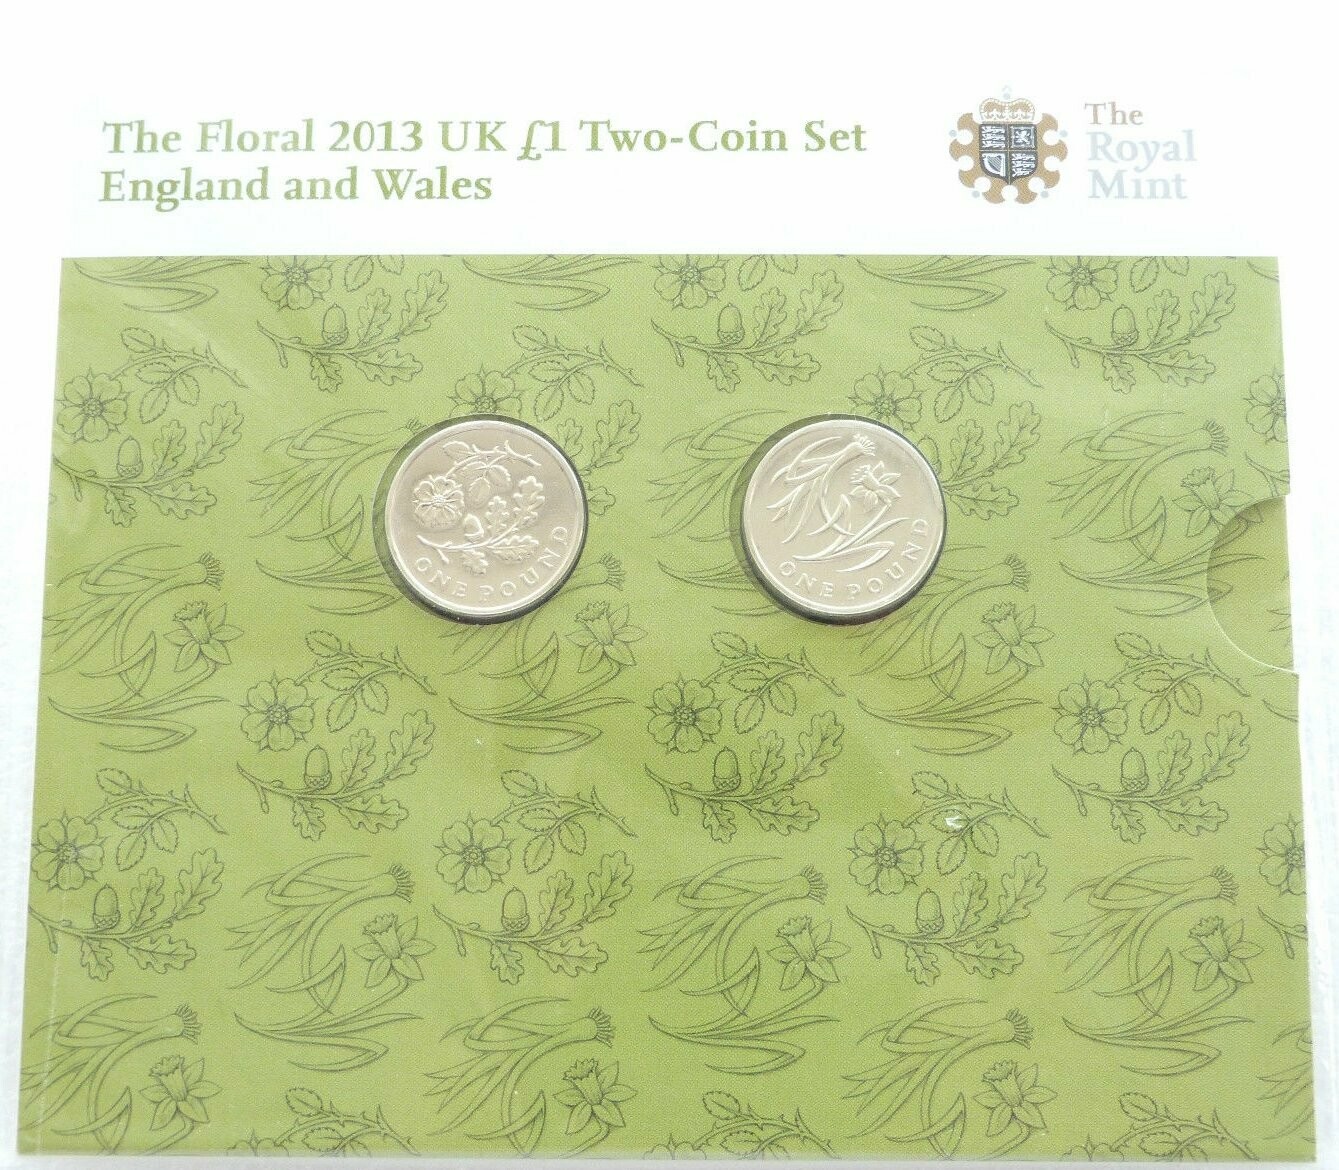 2013 British Floral England Wales £1 Brilliant Uncirculated 2 Coin Set Sealed